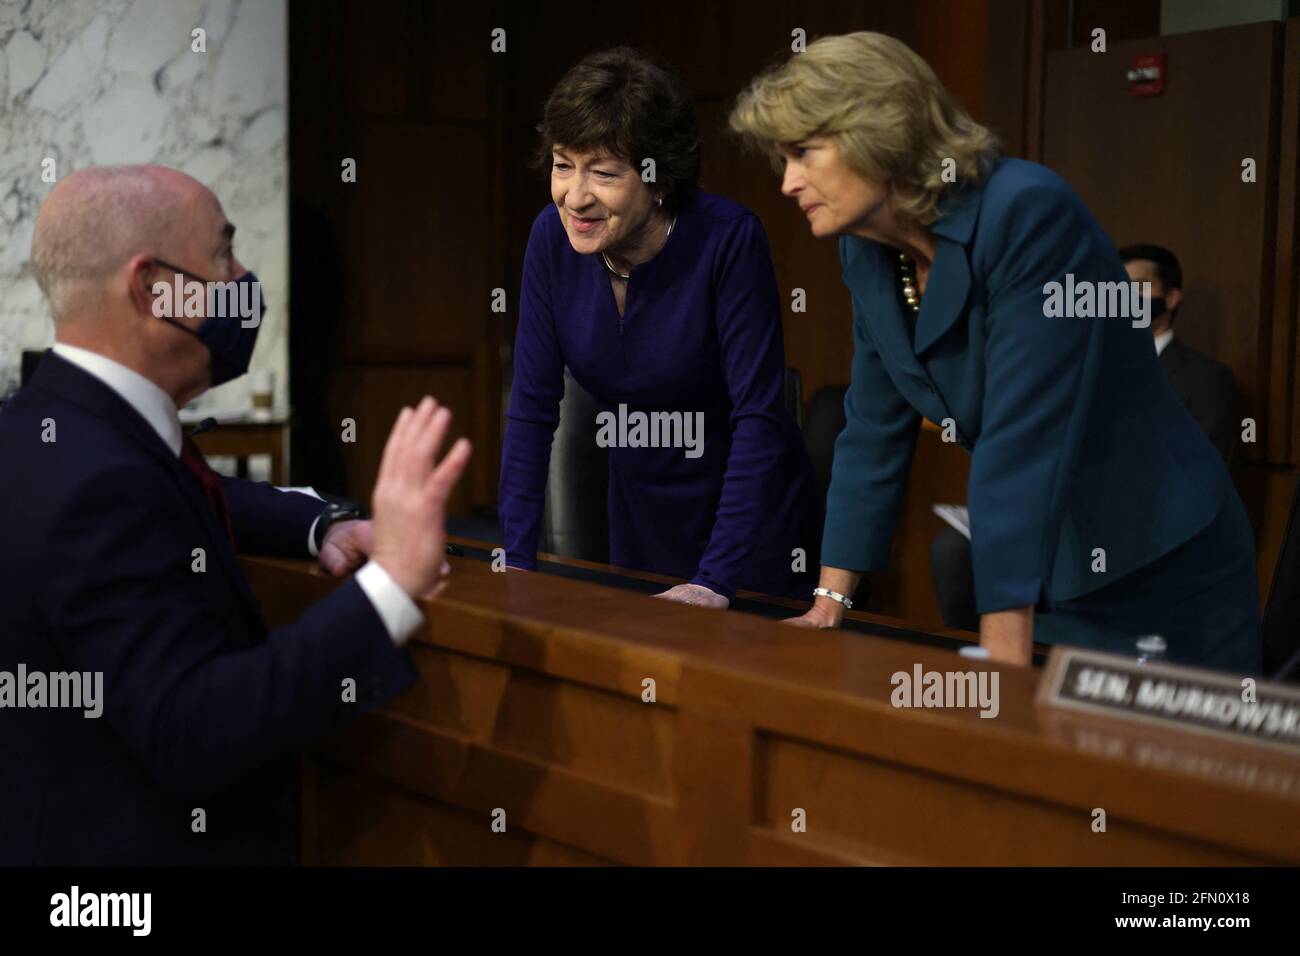 Washington, United States. 12th May, 2021. U.S. Homeland Security Secretary Alejandro Mayorkas (L) talks to Sen. Susan Collins (R=ME) (2nd L) and Sen. Lisa Murkowski (R-AK) (R) during a break of a hearing before the Senate Appropriations Committee at Hart Senate Office Building on May 12, 2021 on Capitol Hill in Washington, DC, USA. The committee held a hearing on 'Domestic Violent Extremism in America.' Photo by Alex Wong/Pool/ABACAPRESS.COM Credit: Abaca Press/Alamy Live News Stock Photo